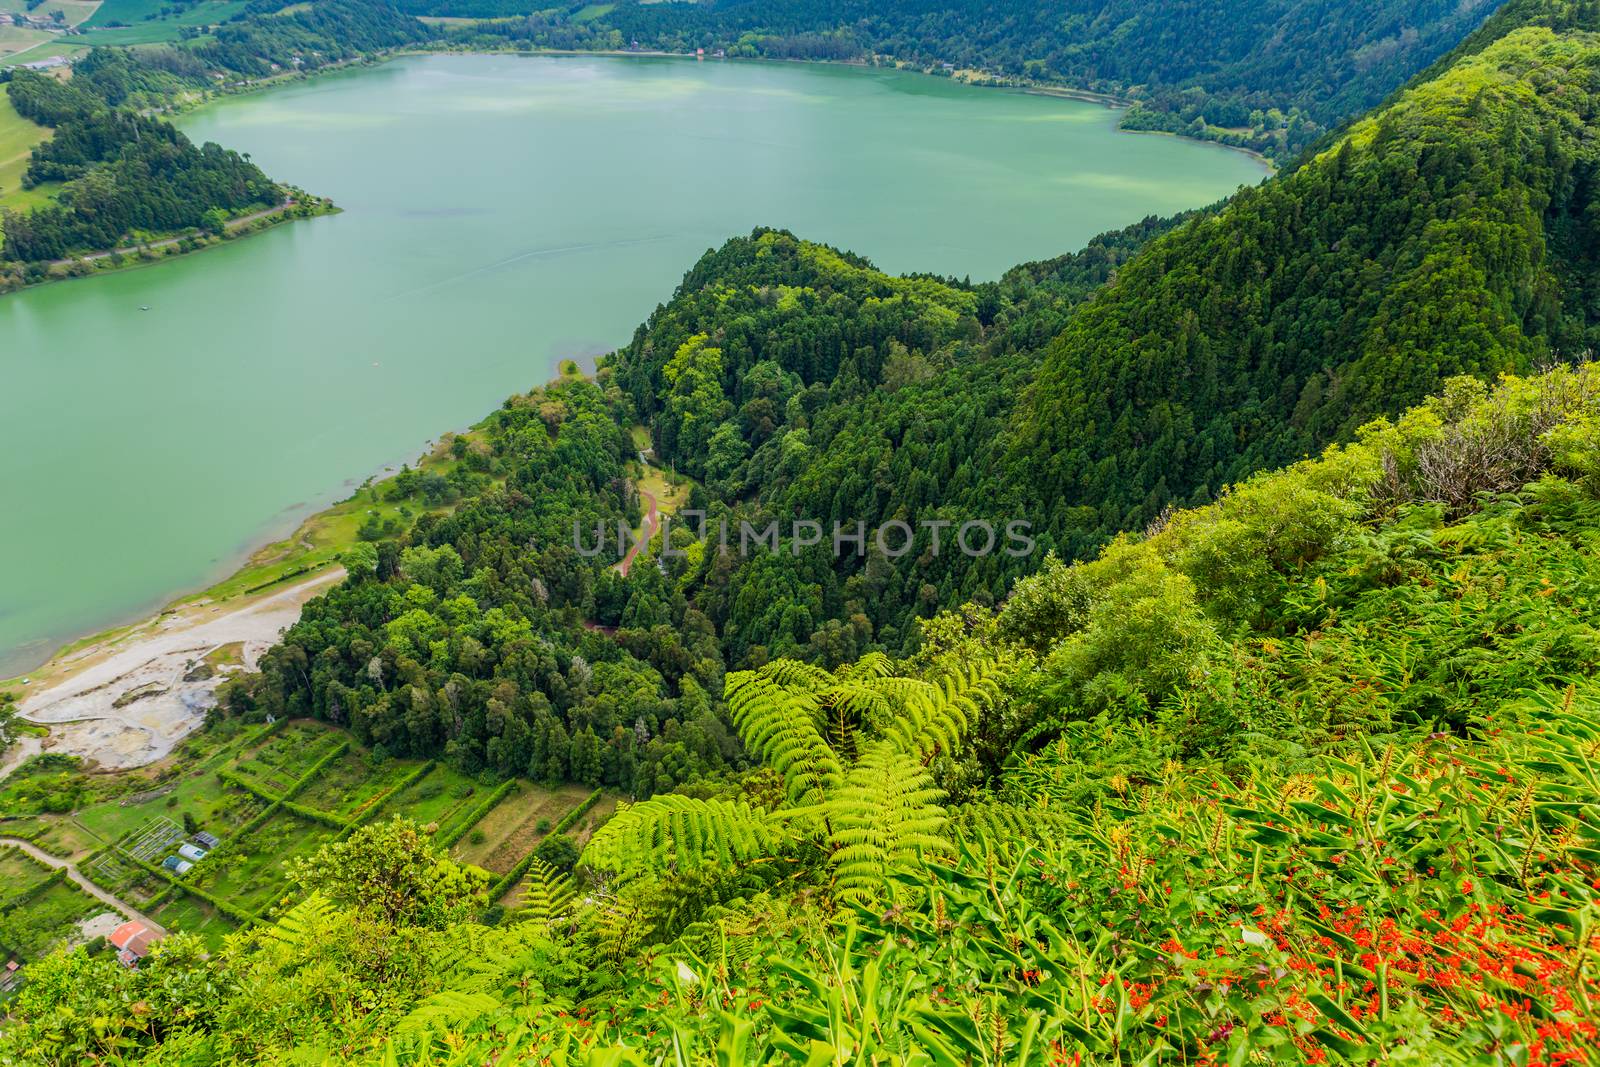 View of the Lake Furnas (Lagoa das Furnas) on Sao Miguel Island, Azores, Portugal from the Pico do Ferro scenic viewpoint. Tranquil scene of lush foliage and lake in a volcanic crater